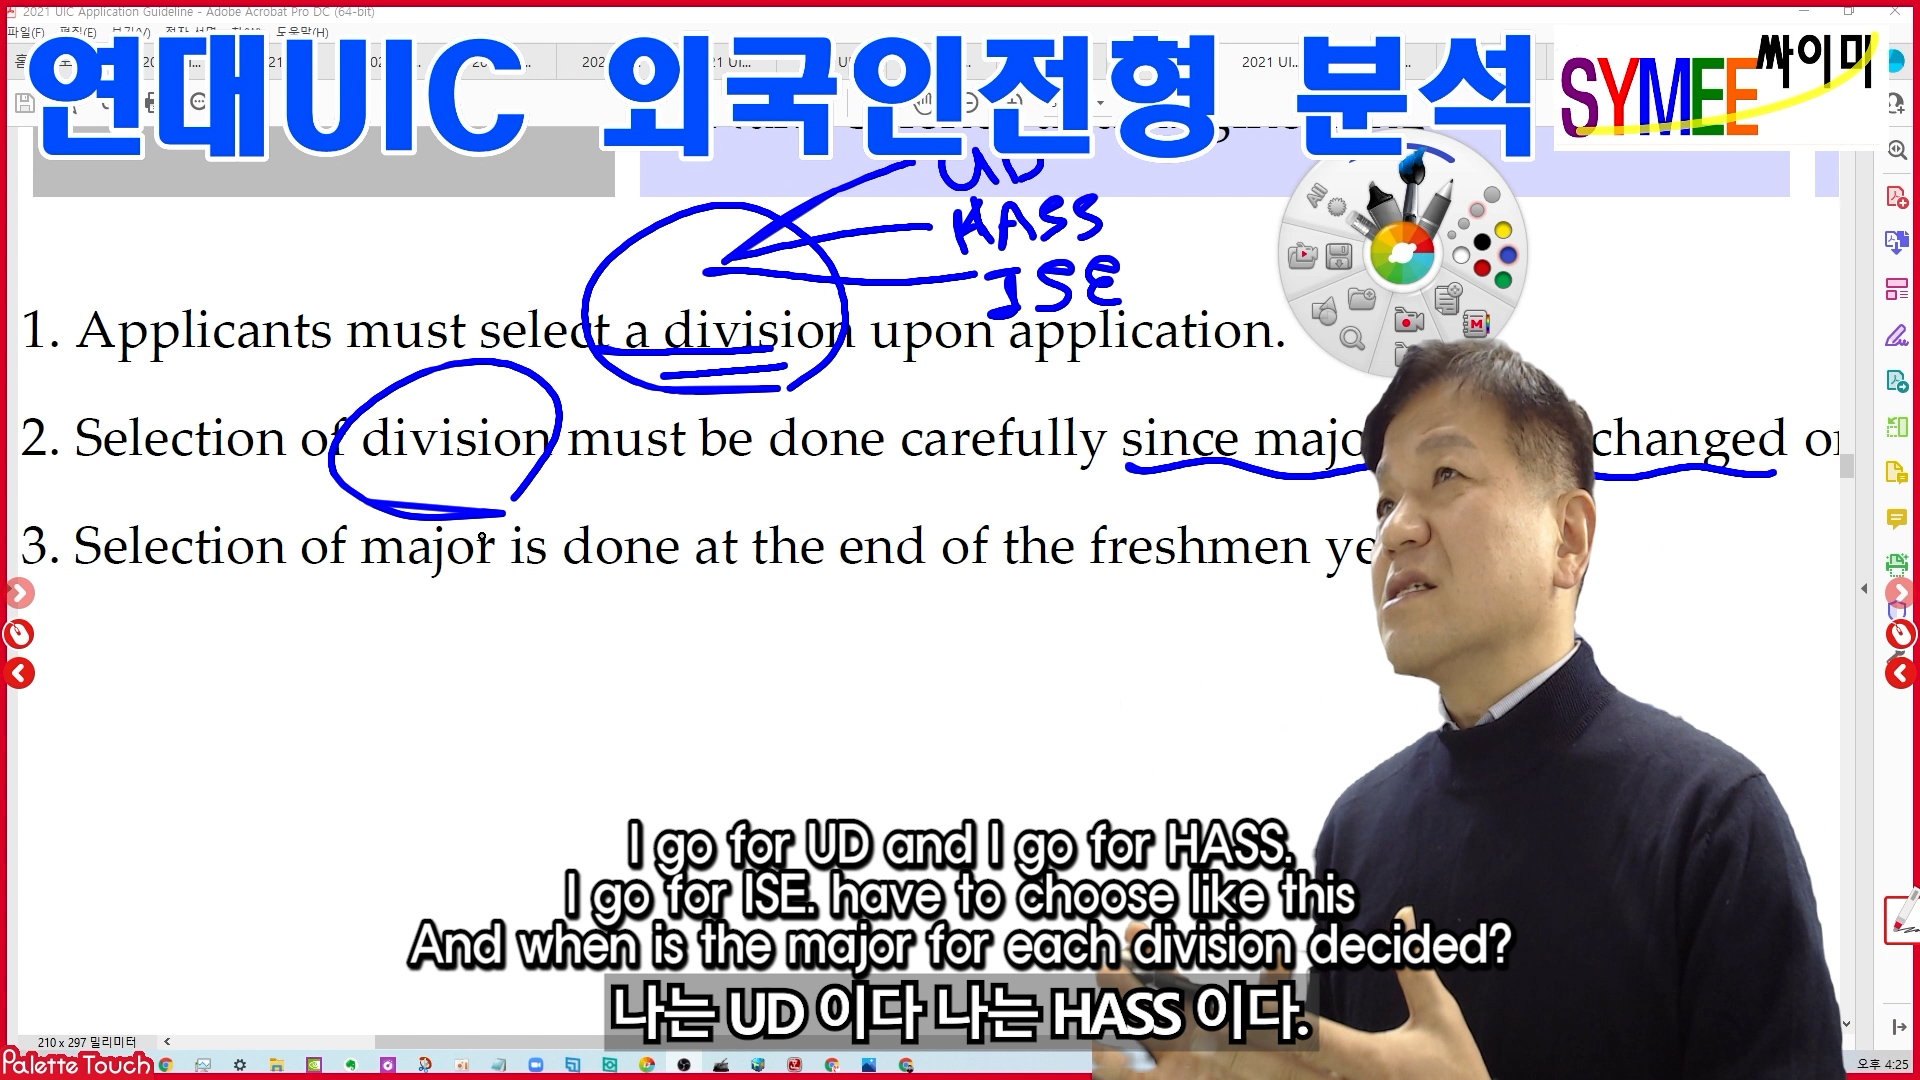 Yonsei Univ. Admission for UIC for Foreign Student 05 Majors.00_08_28_32.스틸 013.jpg